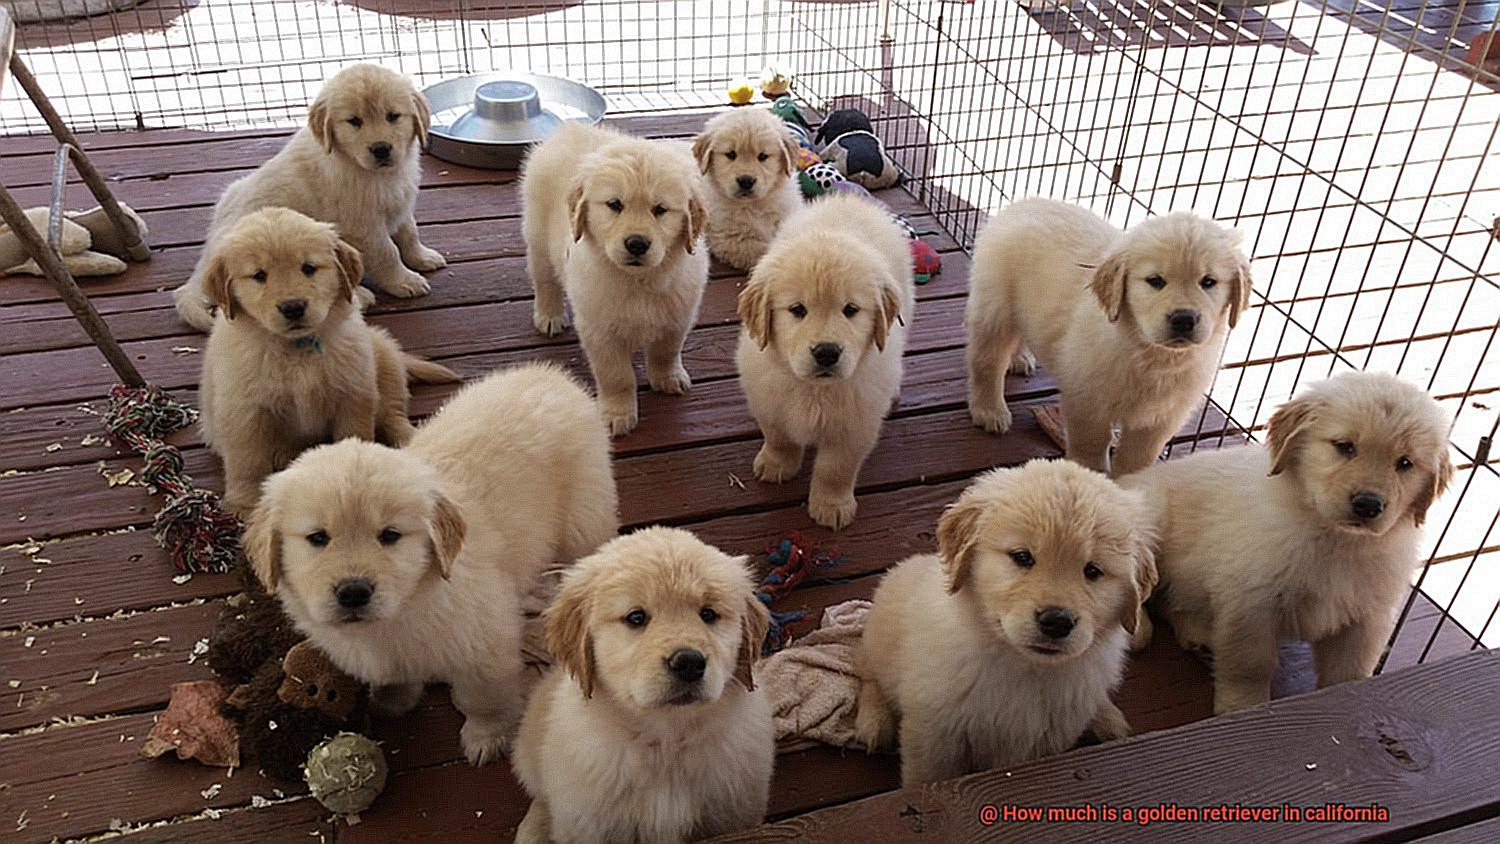 How much is a golden retriever in california-6